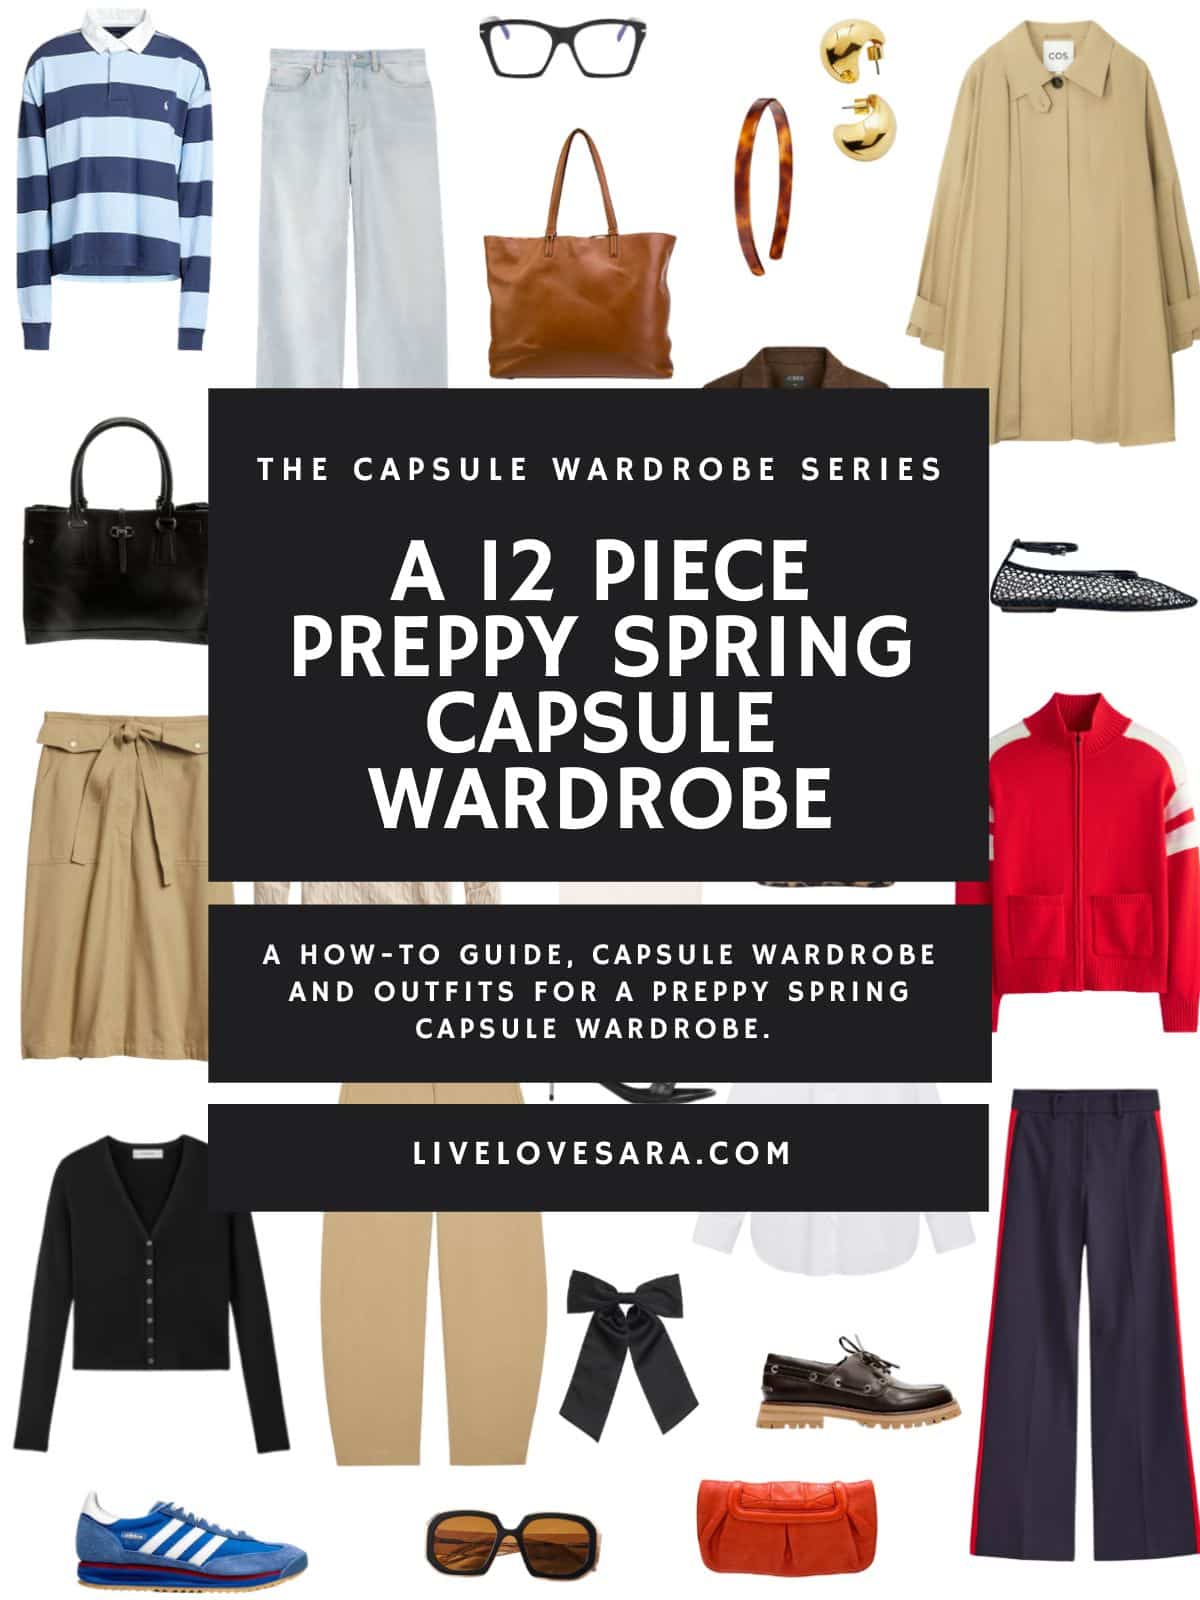 A white background with 12 clothing items plus shoes and accessories for a 12 Piece Preppy Spring capsule wardrobe that's both stylish and easy. In the middle is a black box with white text that reads, "A 12 Piece Preppy Spring Capsule Wardrobe."